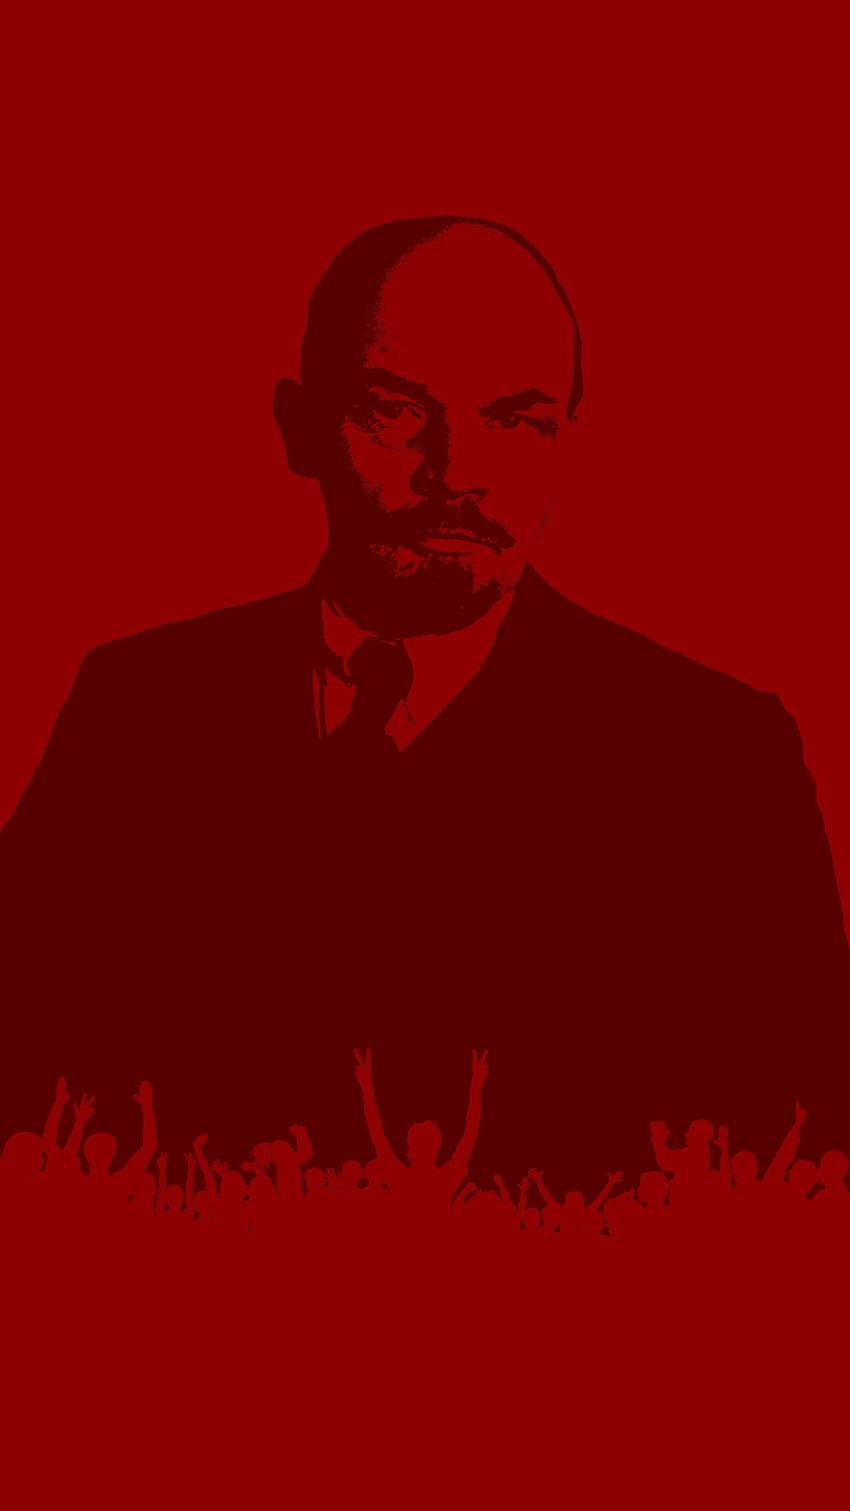 Wallpaper Red, People, Red, Communism, Communism, Lenin, Russia, Russia  images for desktop, section рендеринг - download